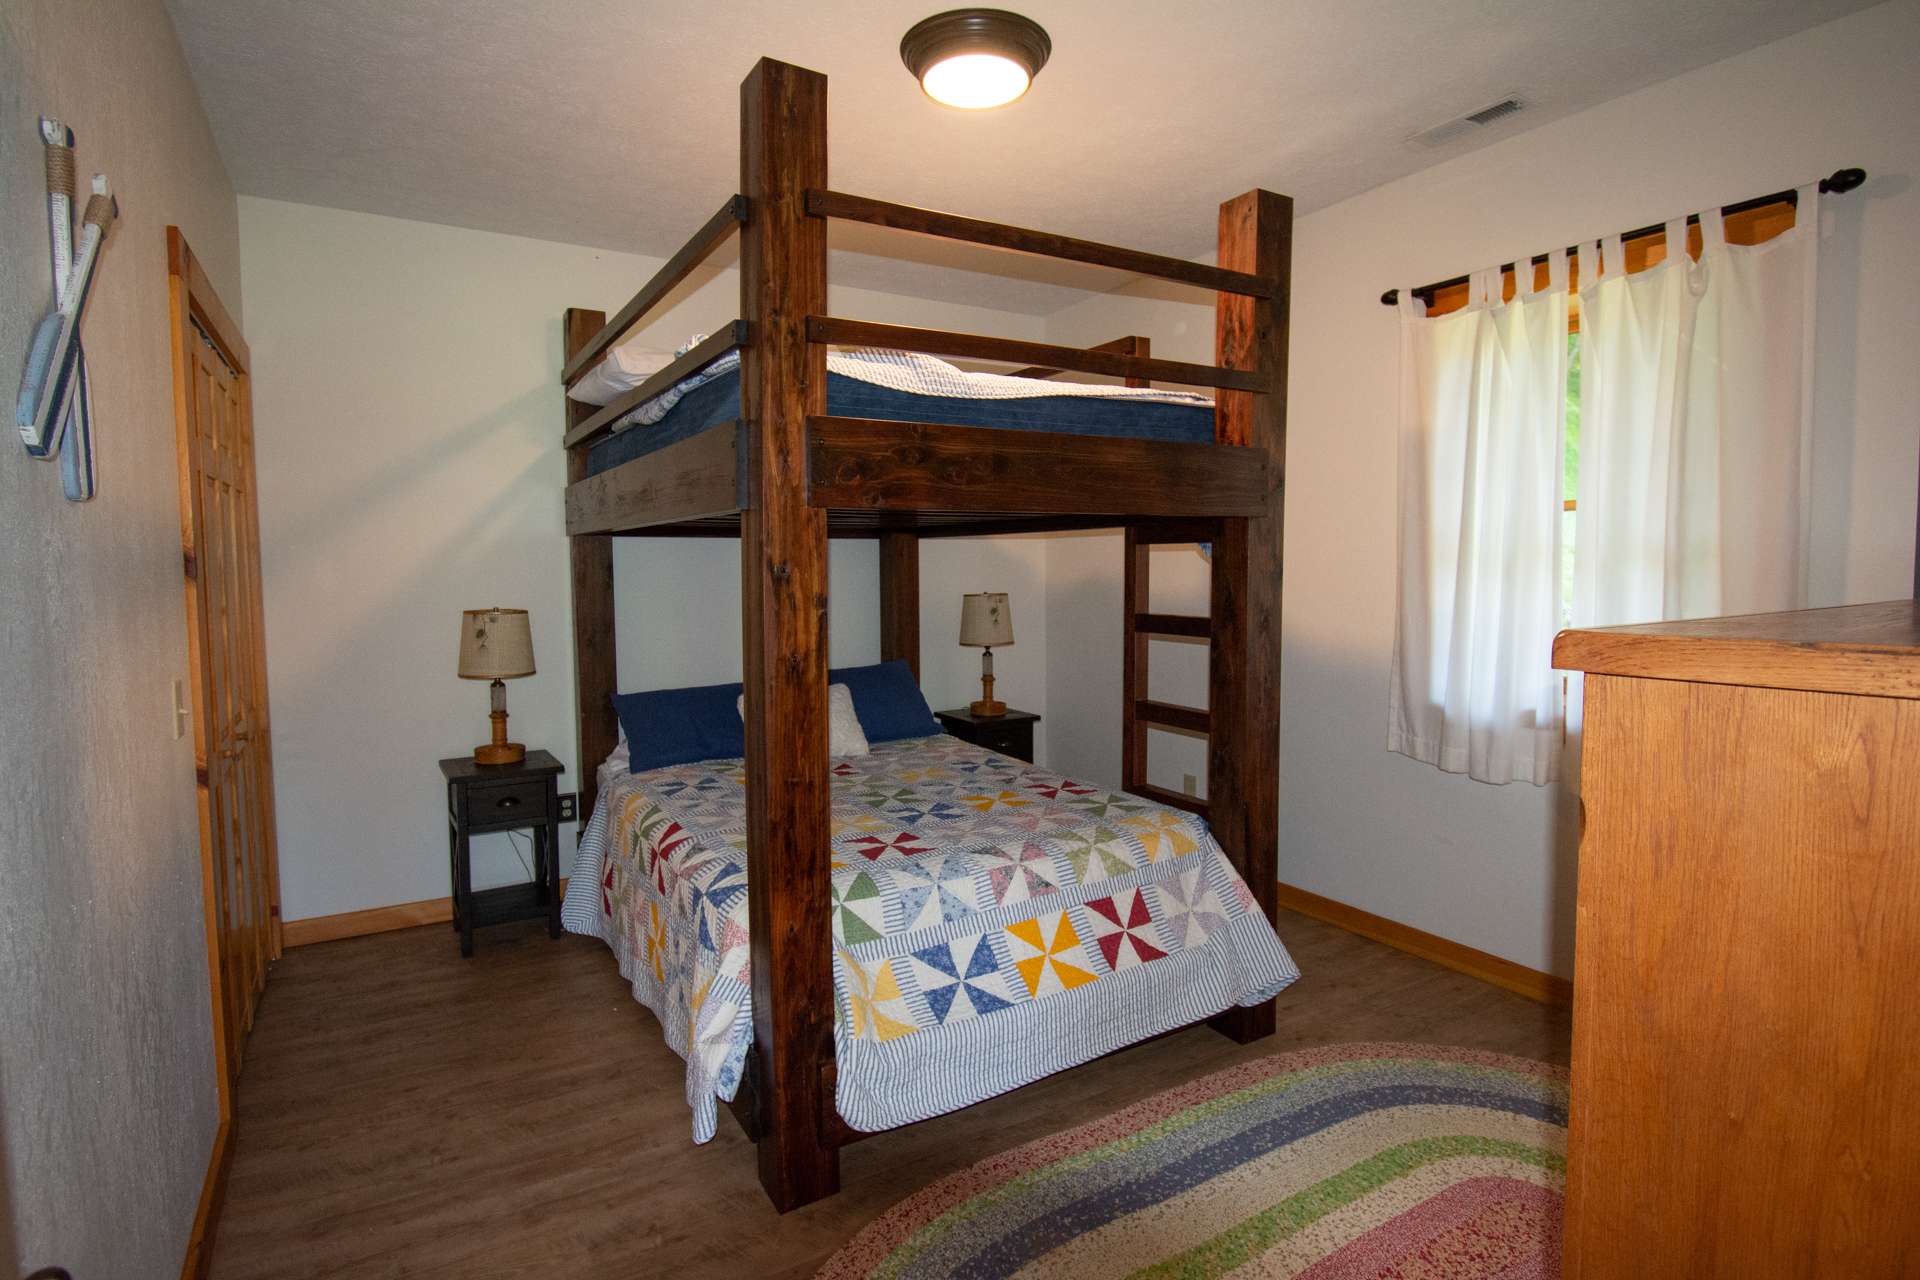 Your overnight guests will enjoy their privacy and amenities of the lower level.